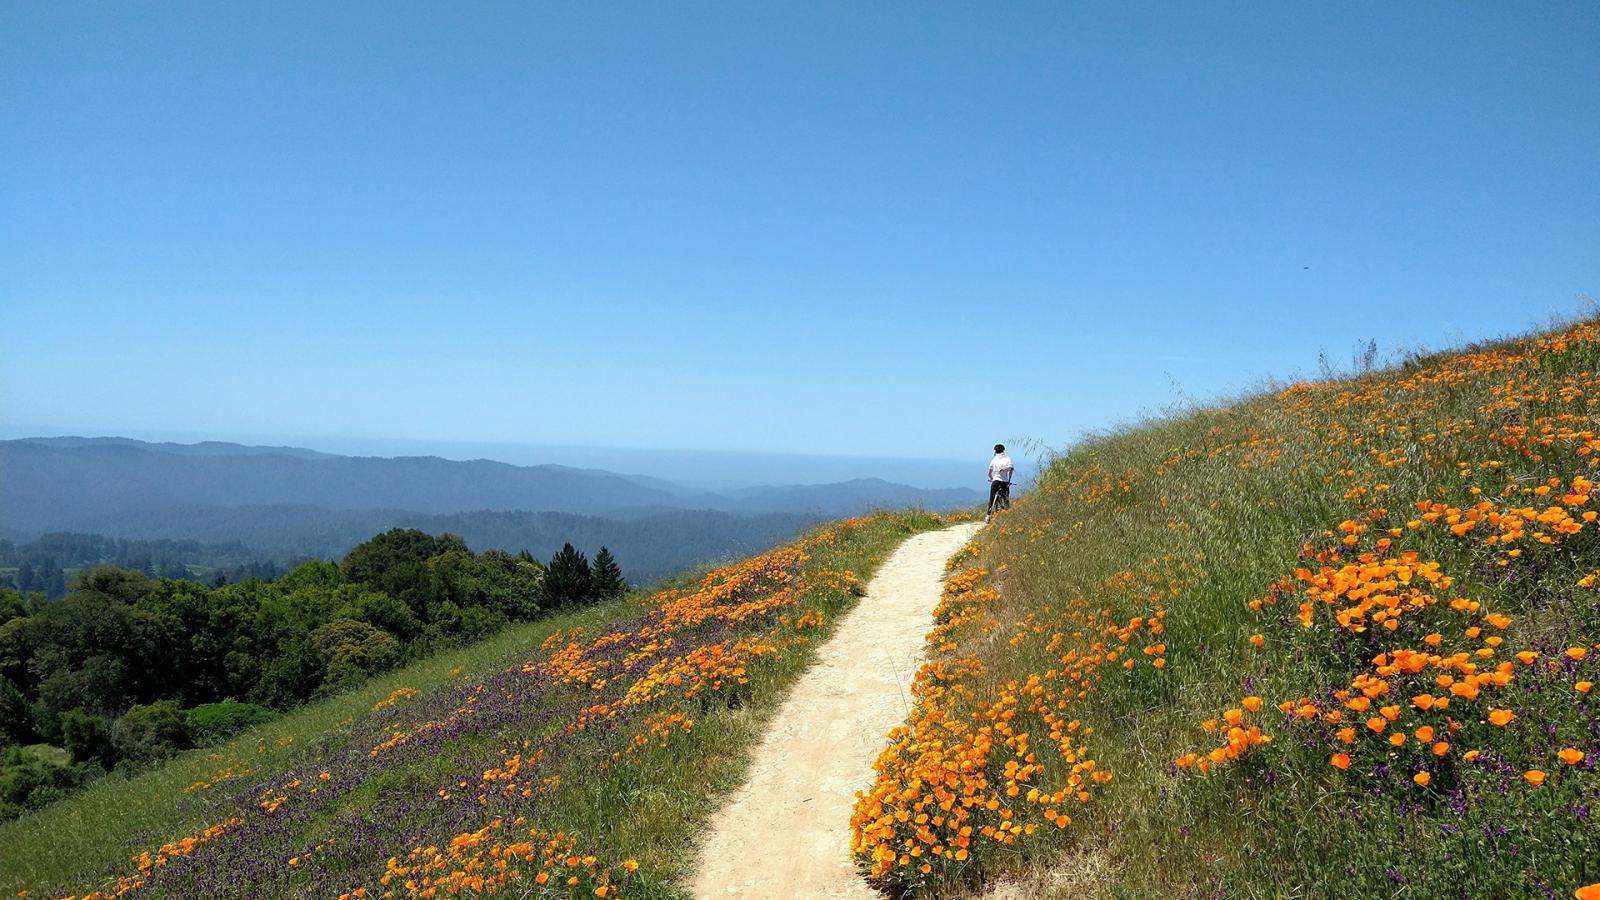 a bicyclist on a trail lined with poppies